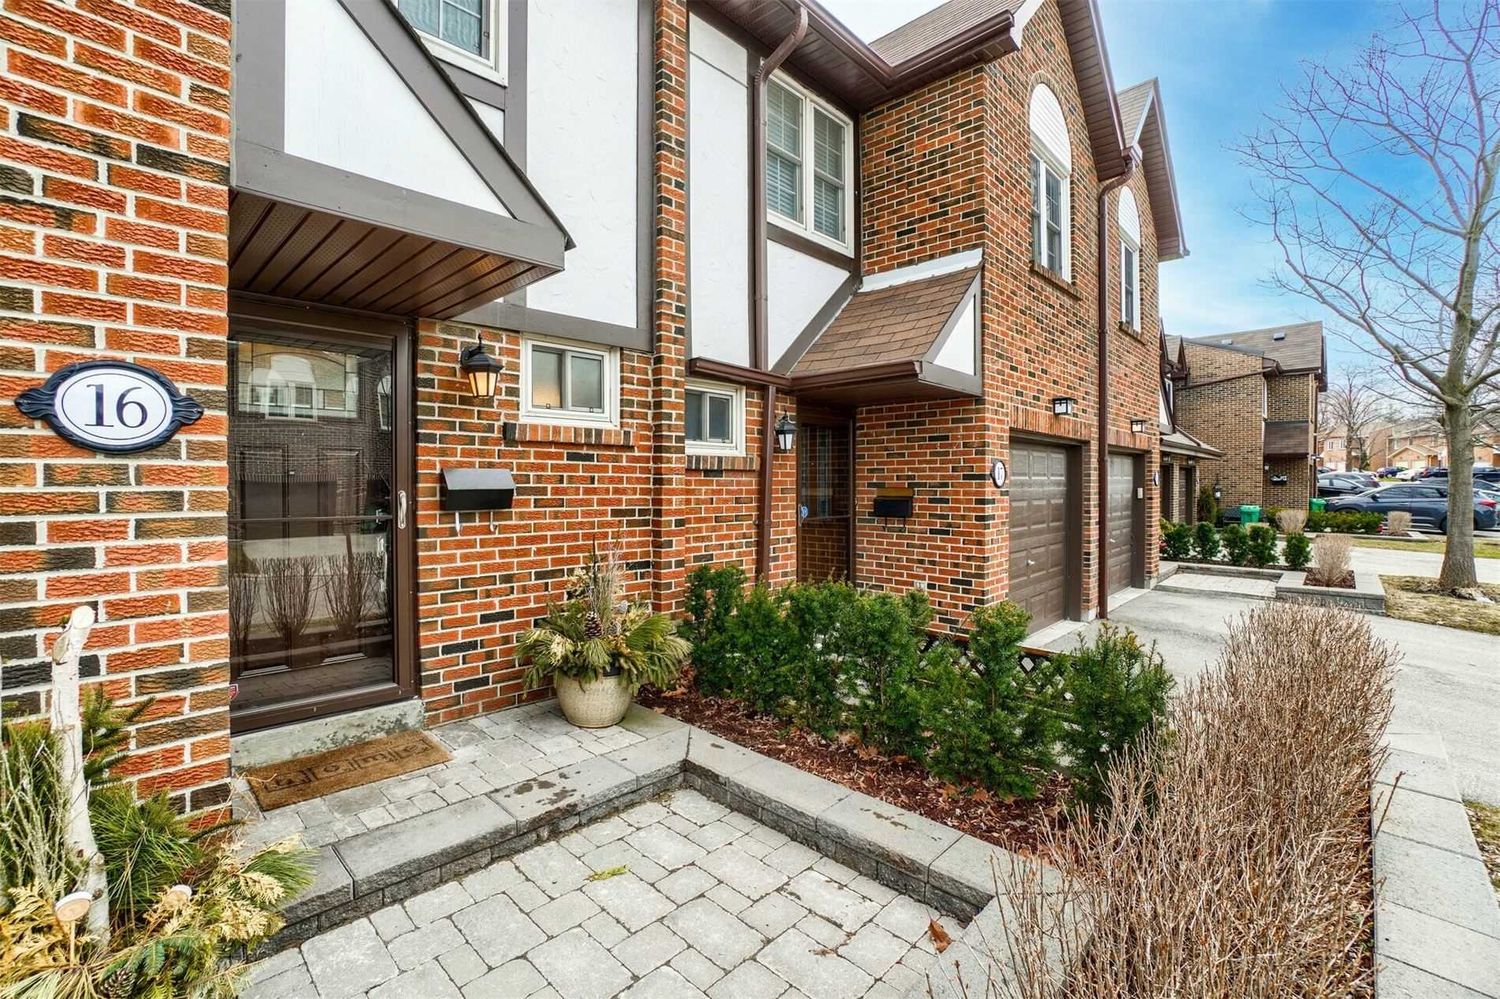 1951 Rathburn Road E. 1951 Rathburn Road Townhomes is located in  Mississauga, Toronto - image #1 of 2